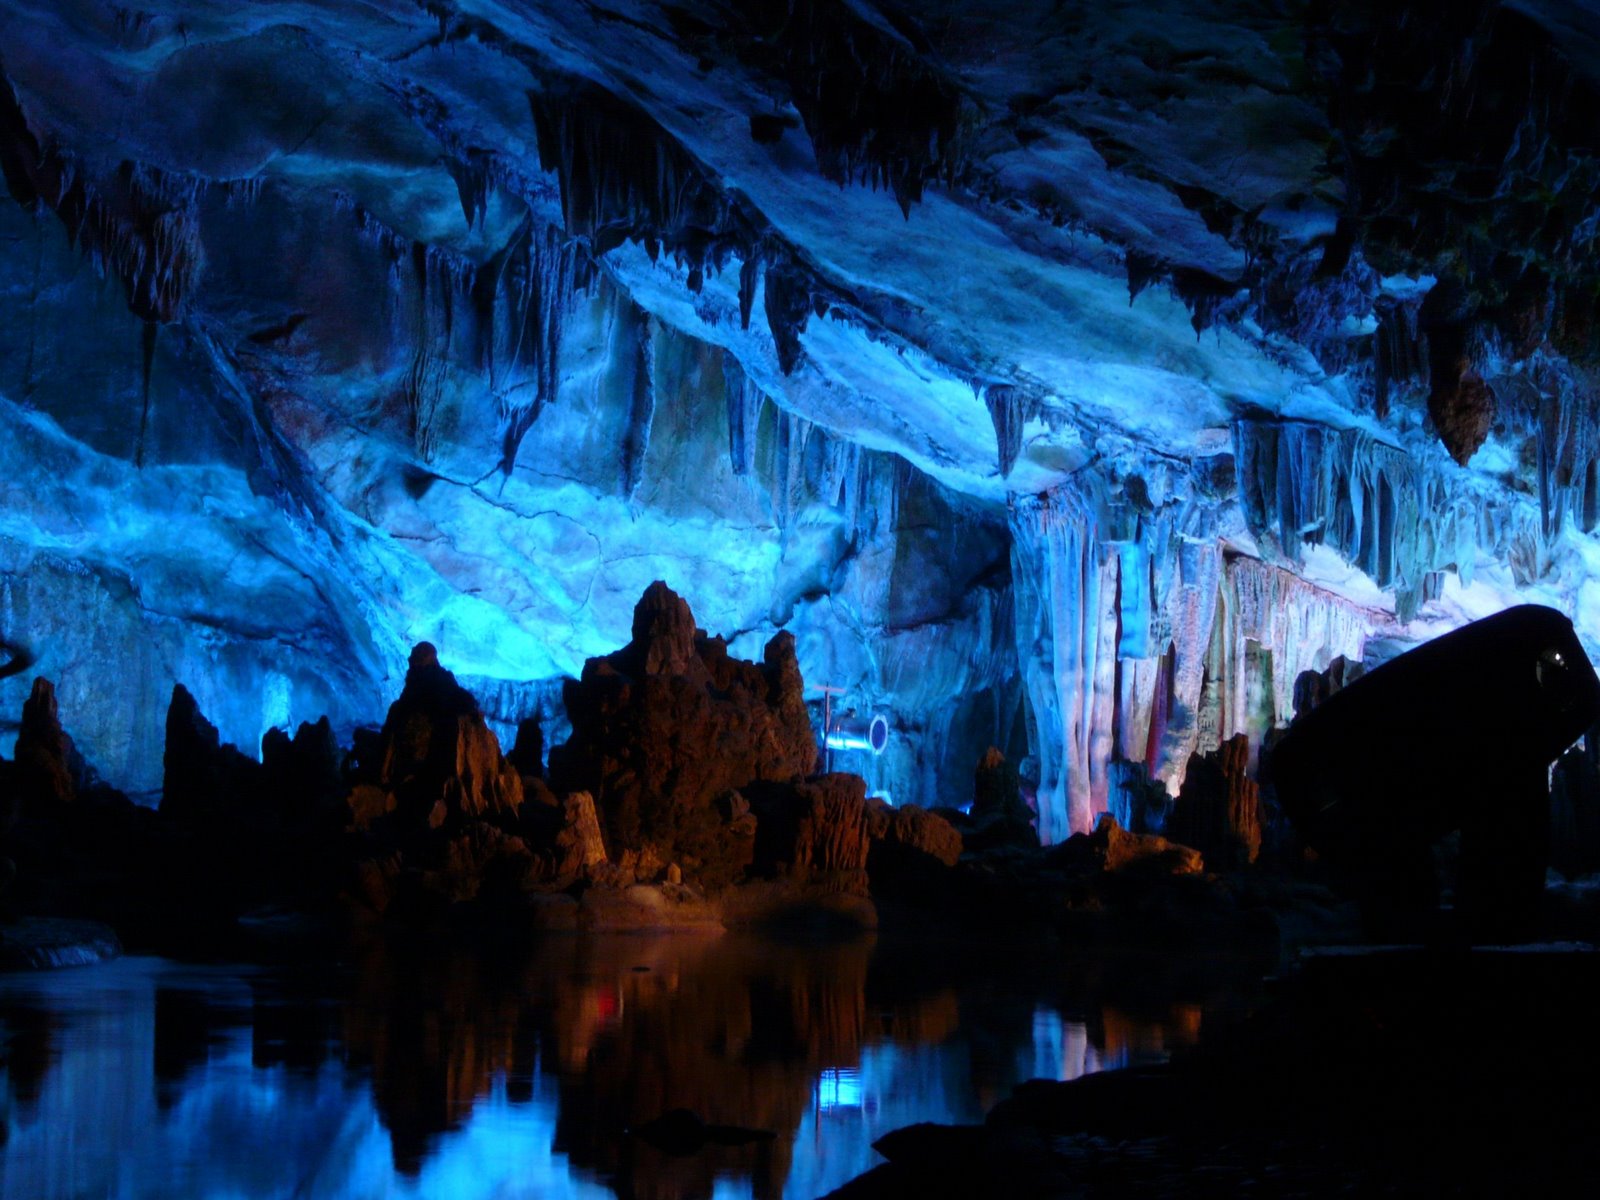 The Reed Flute Cave in China